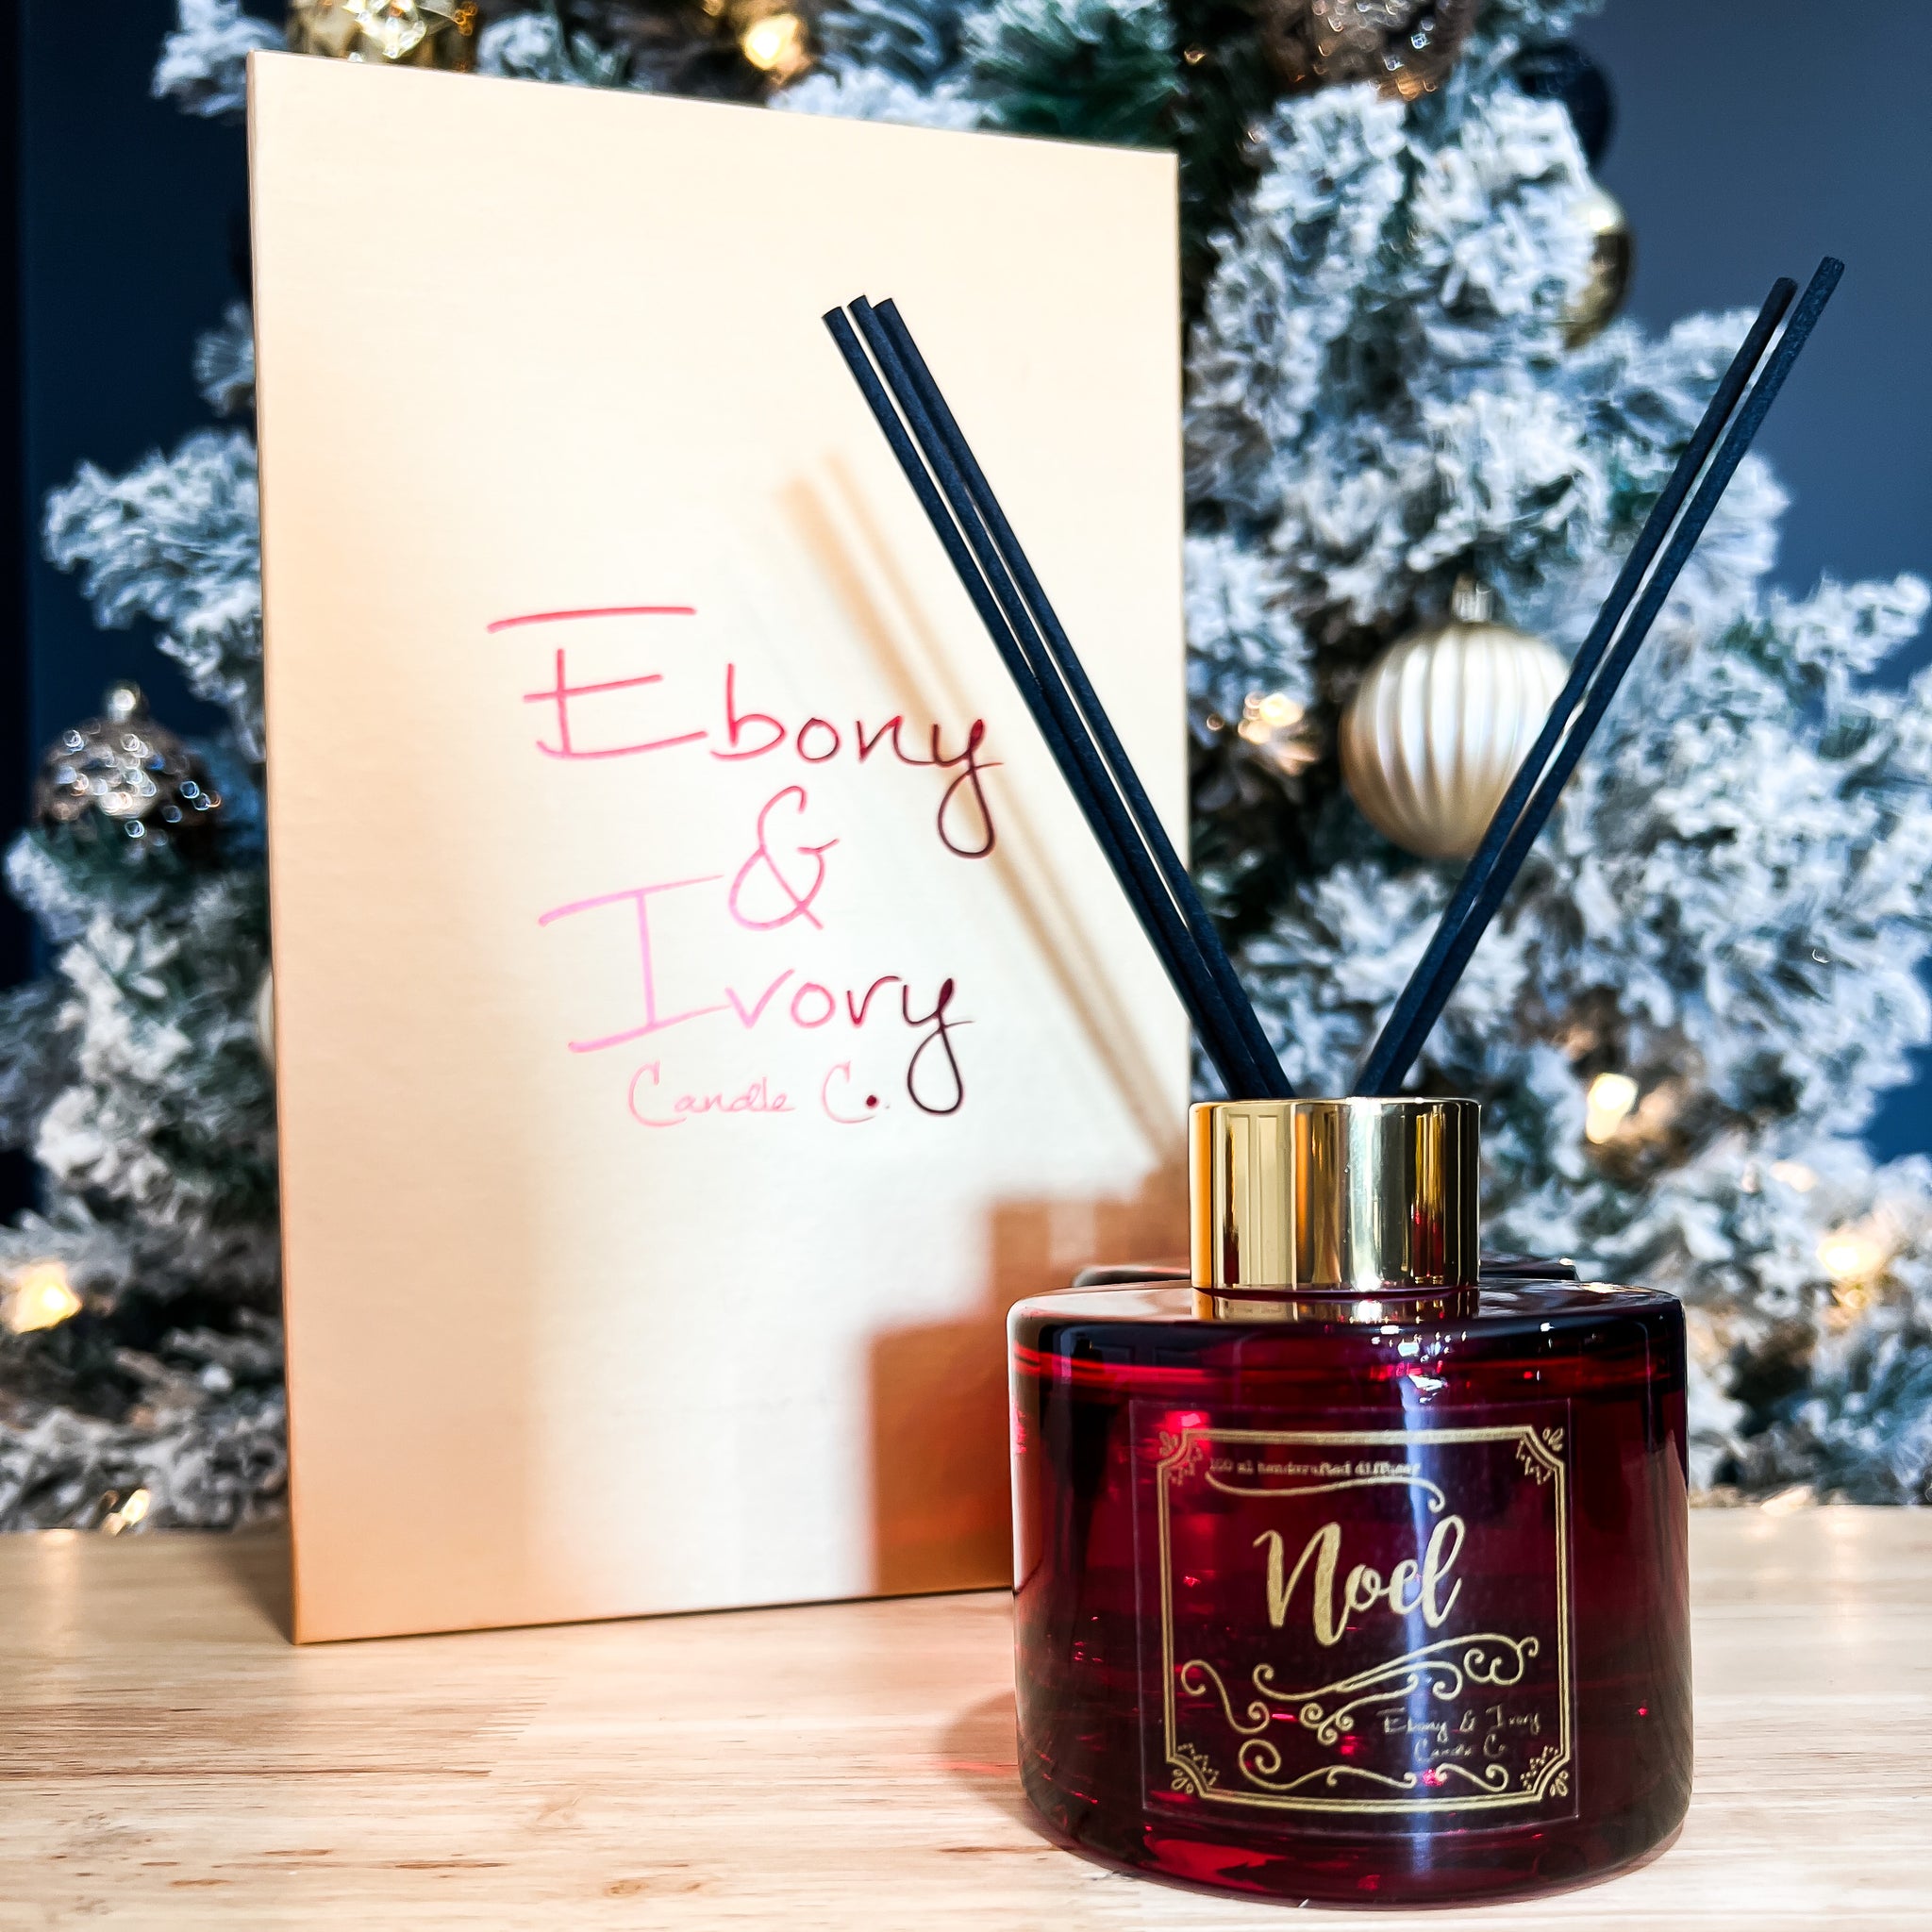 Red, one hundred milliliter, Pine, fir, holiday spices, clove, nutmeg, citrus, orange scented reed diffuser with a gold lid and label